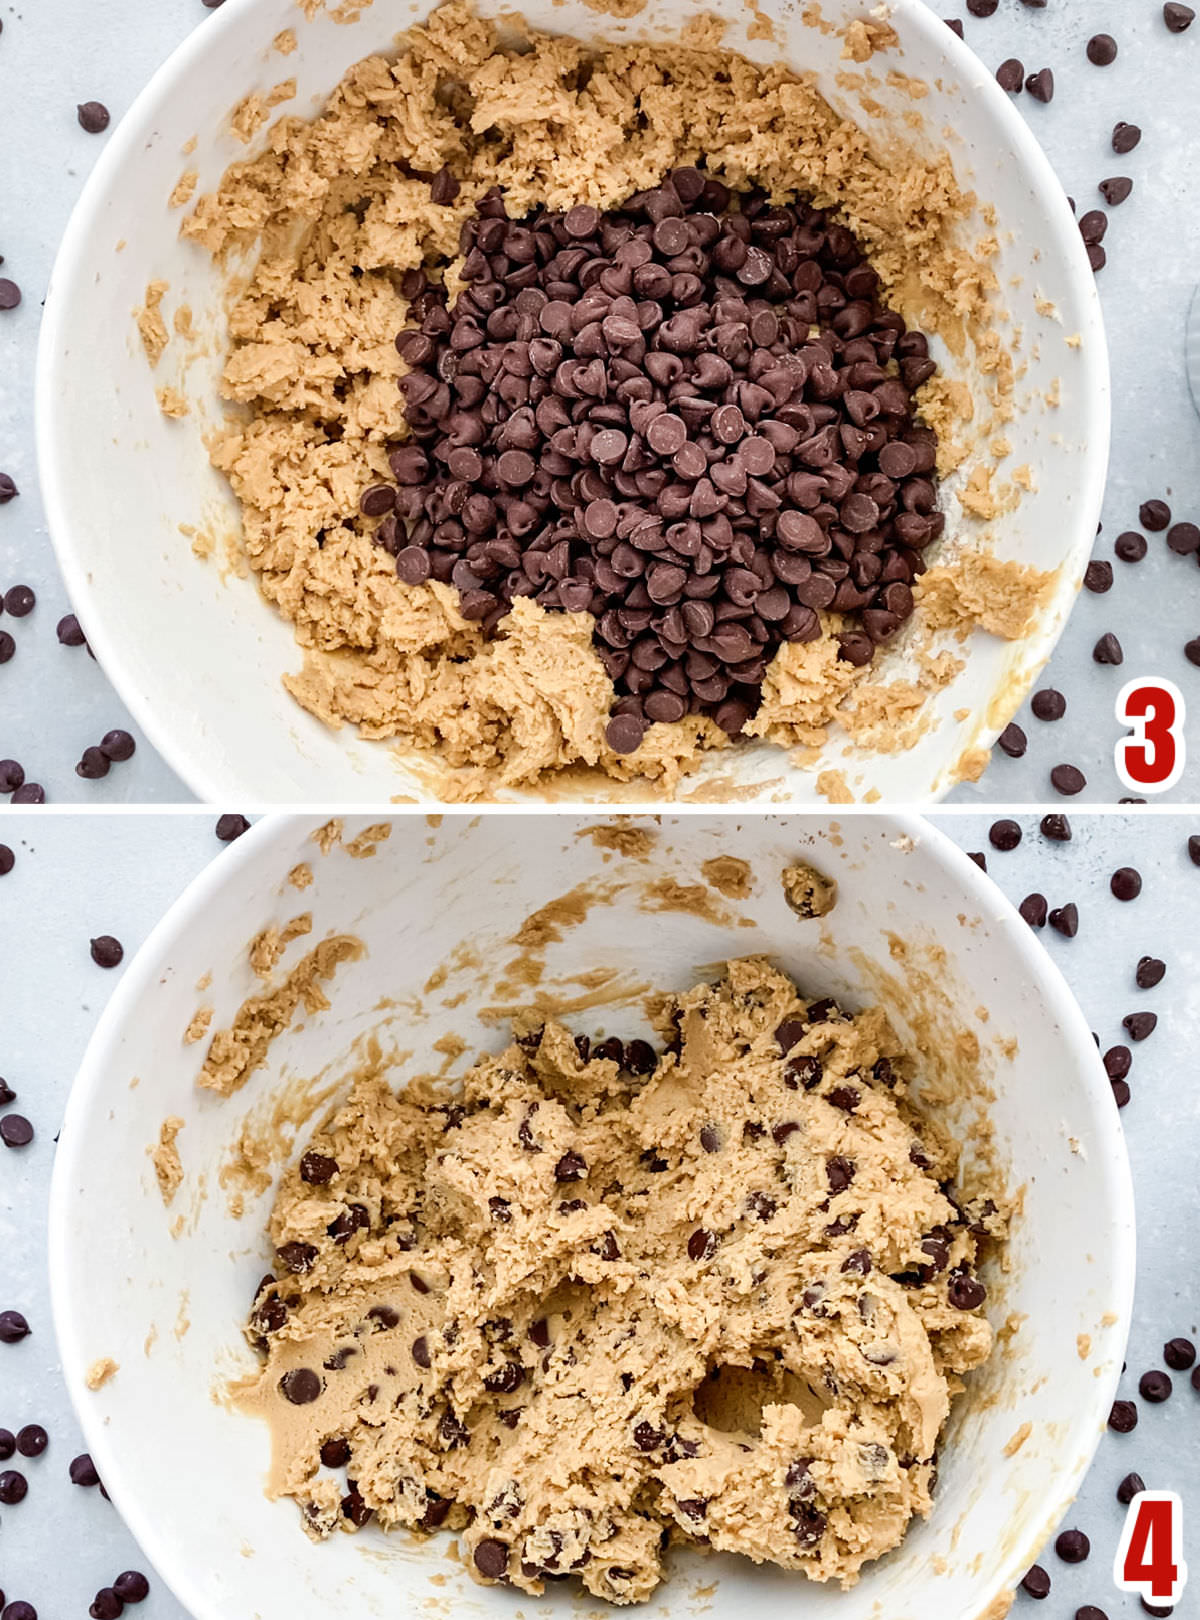 Collage image showing the steps for making the cookie dough for the Chocolate Chip Cookies.